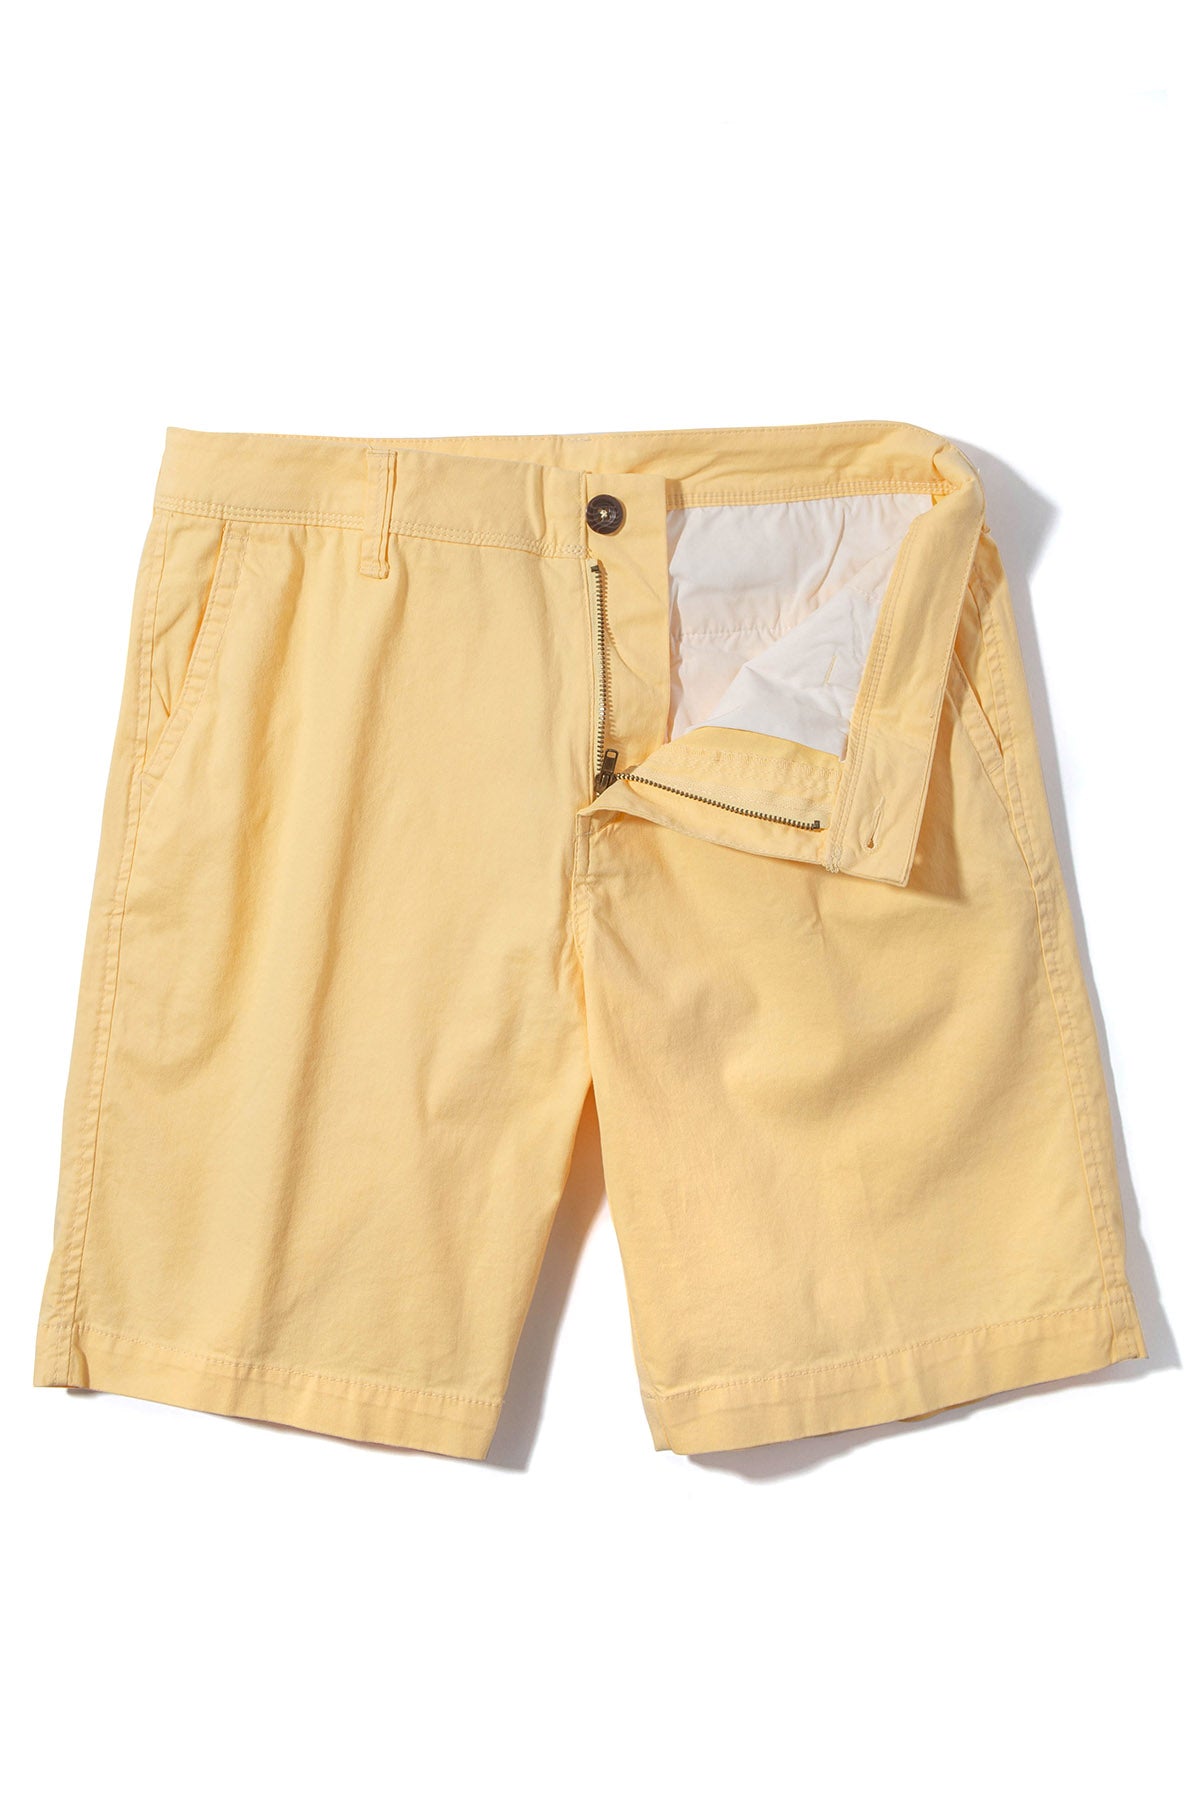 Rockport 9" Stretch Cotton Shorts in Yellow | Mens - Shorts | Georg Roth